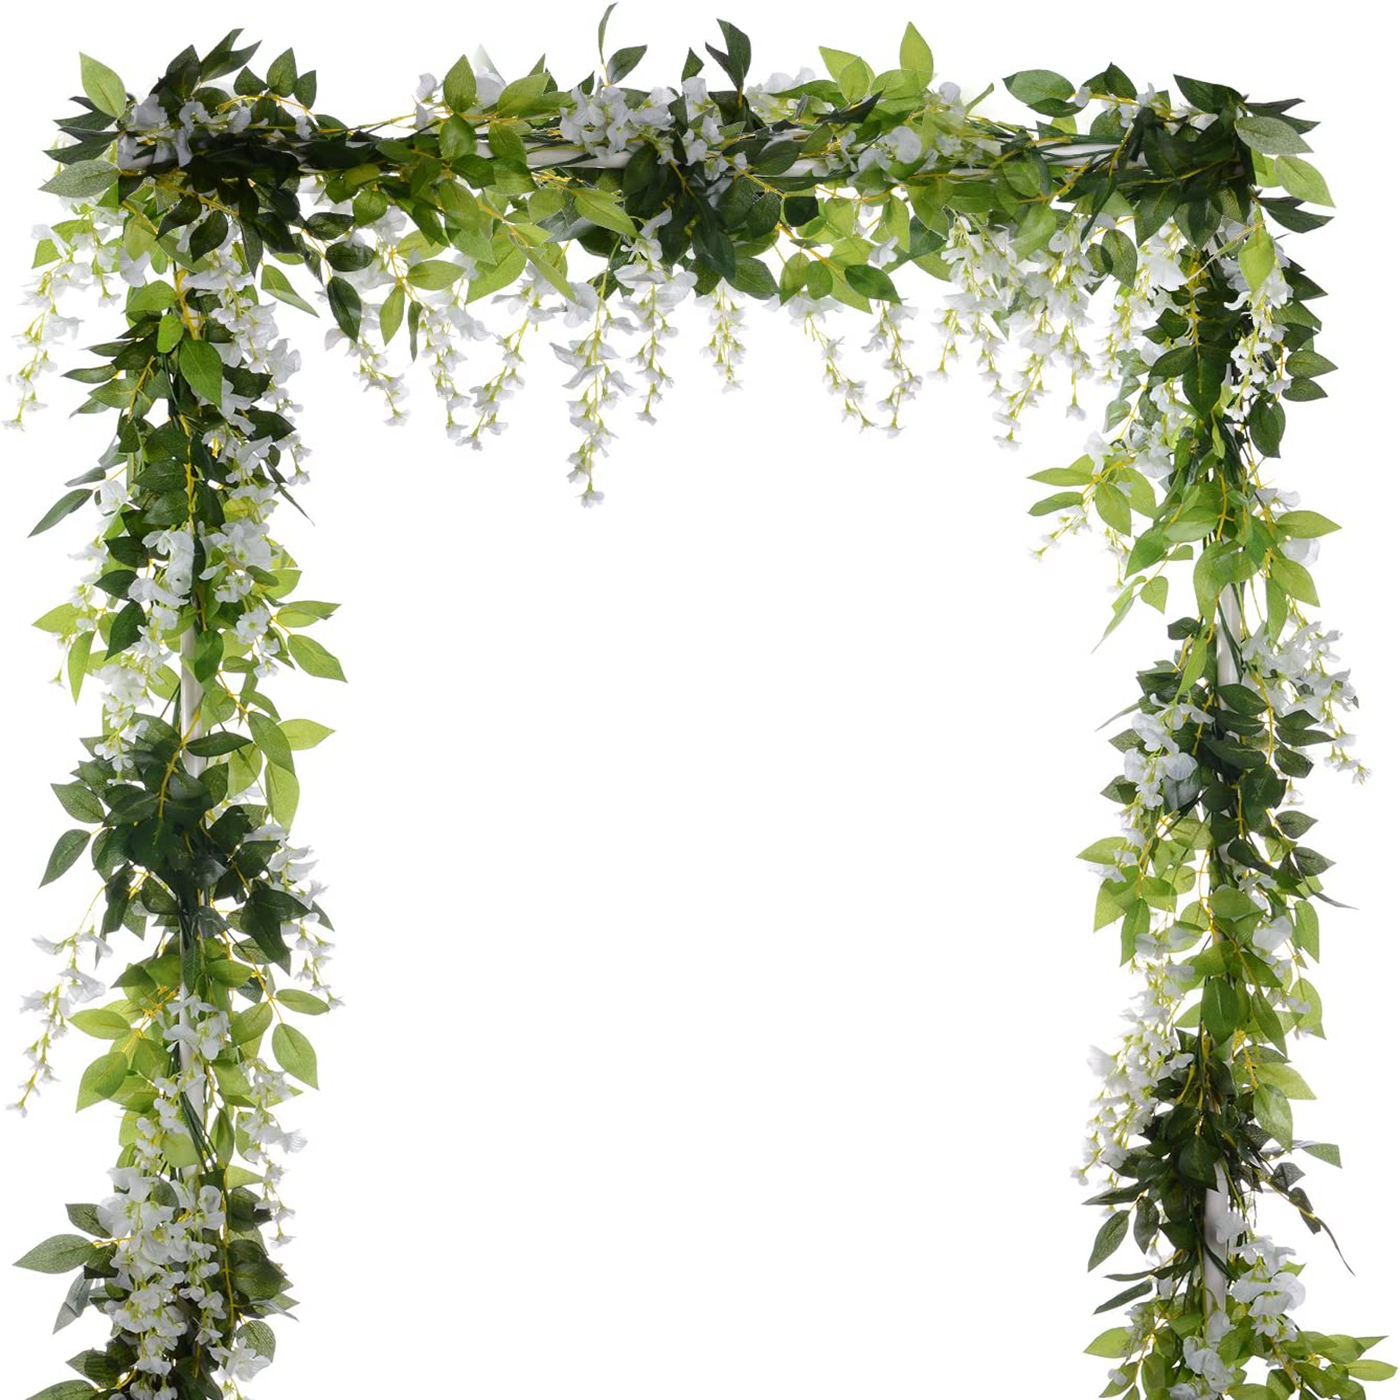 1Pc Fake Wisteria Leaf Wall Hanging Artificial Vines Faux Green Hanging  Plants For Bedroom Wall House Decor Outdoor Wedding Photography Backdrops  Non-discoloring